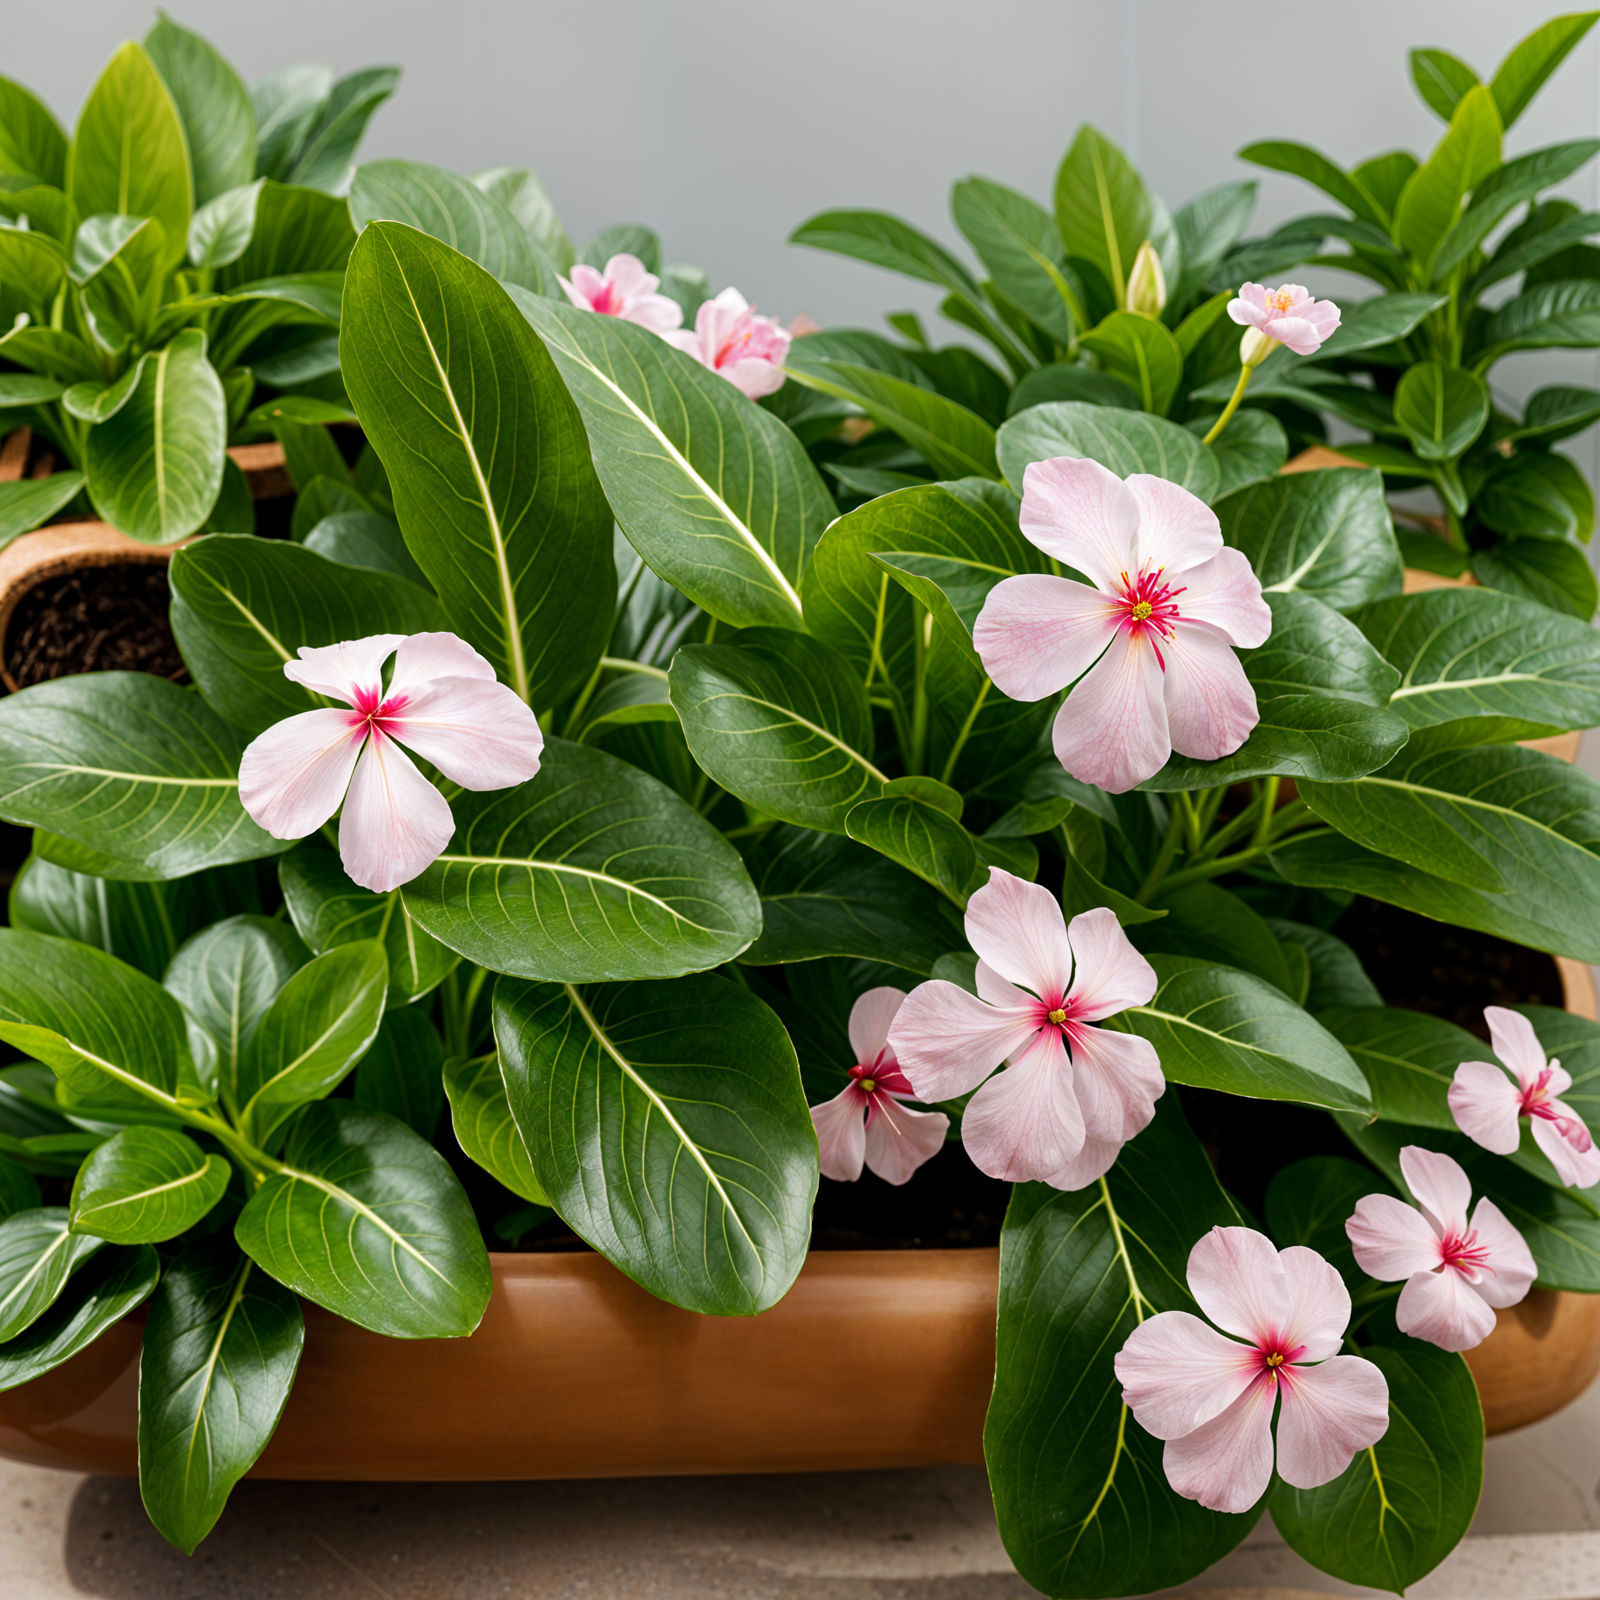 Catharanthus roseus plant with flower in a planter, under clear indoor lighting, dark background.